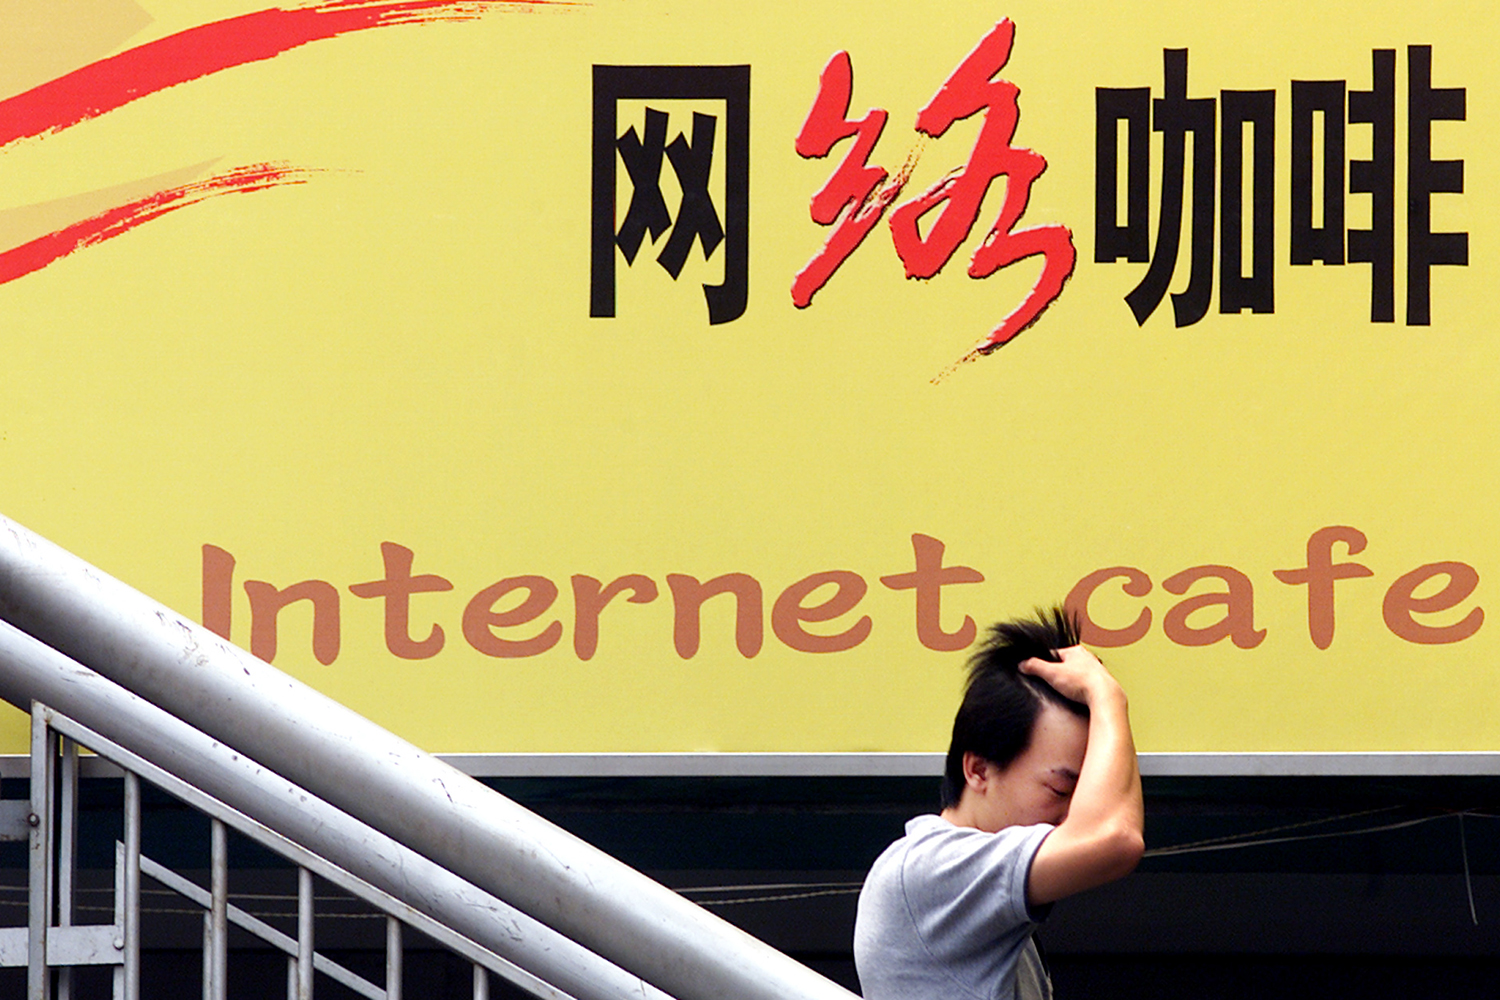 Woman presumed dead had been playing in an Internet cafe for 10 years